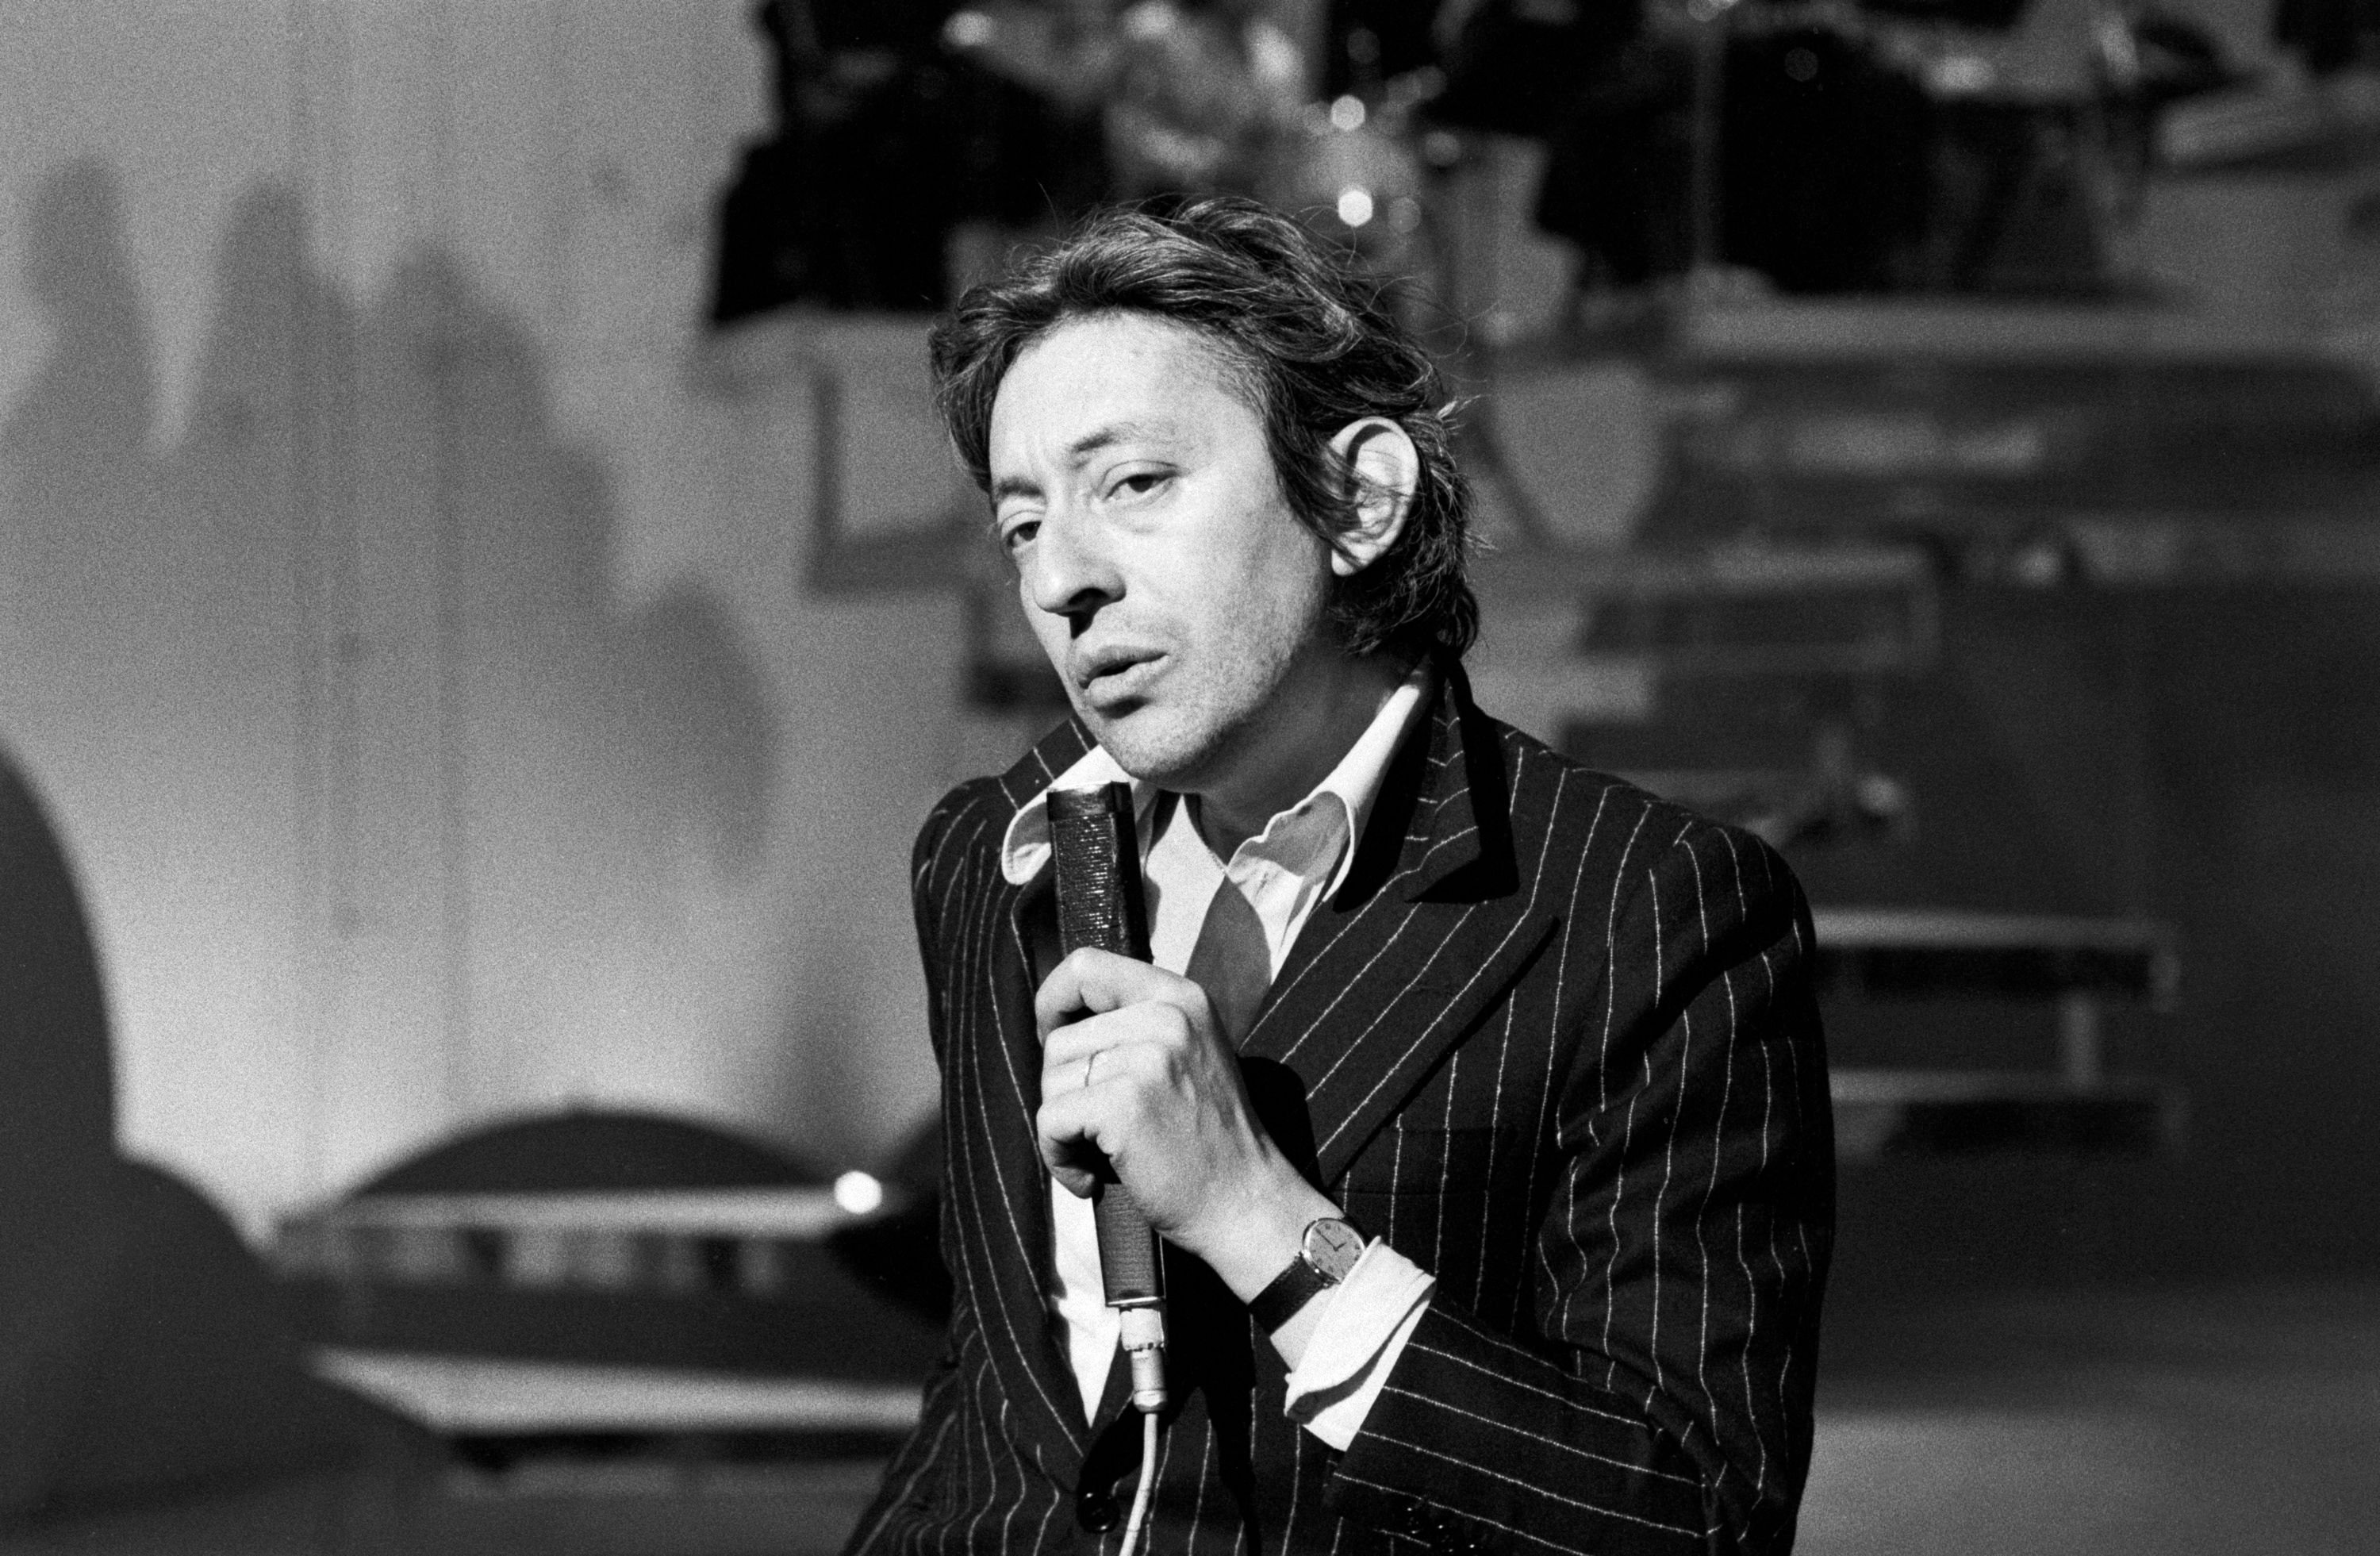 L'inoubliable Serge Gainsbourg. l Source : Getty Images